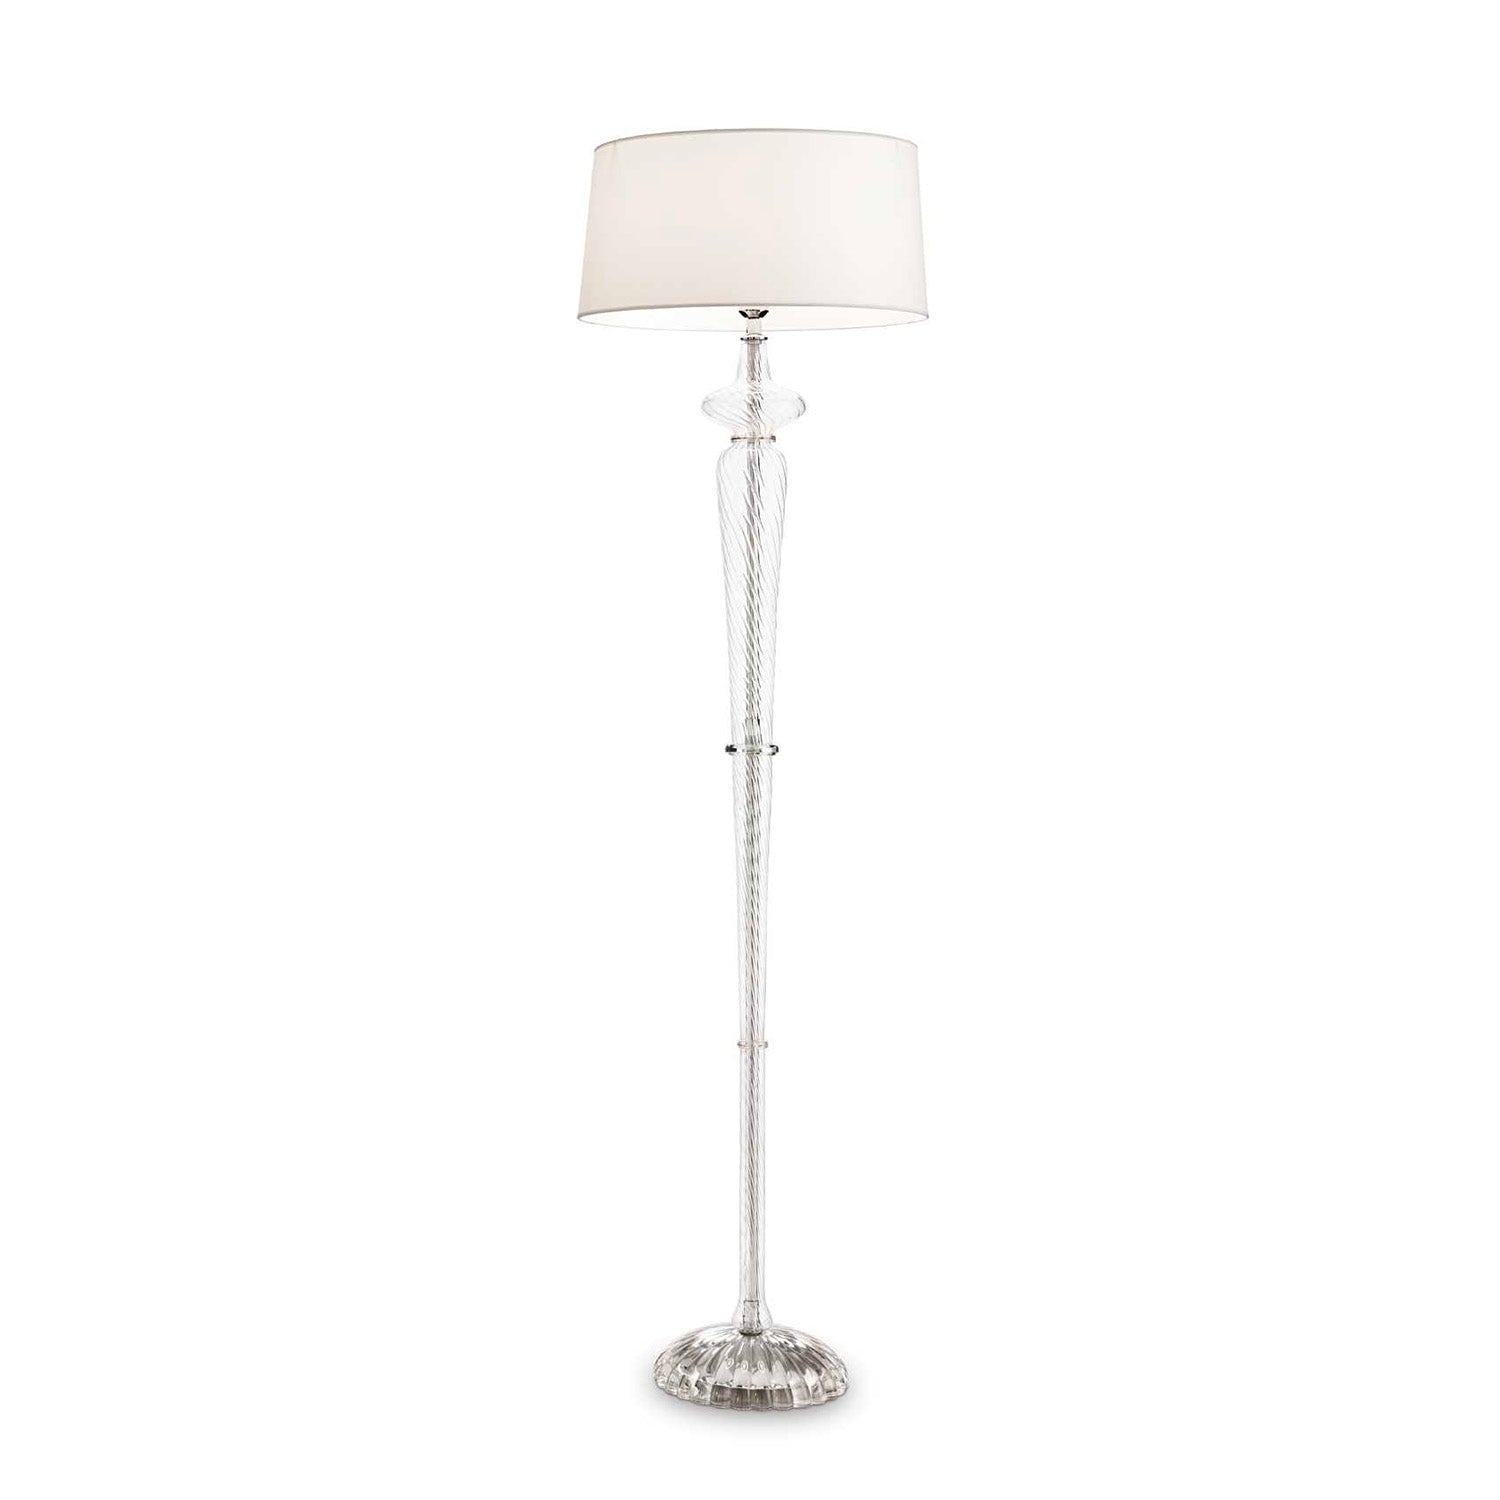 FORCOLA - Baroque floor lamp in glass and fabric lampshade